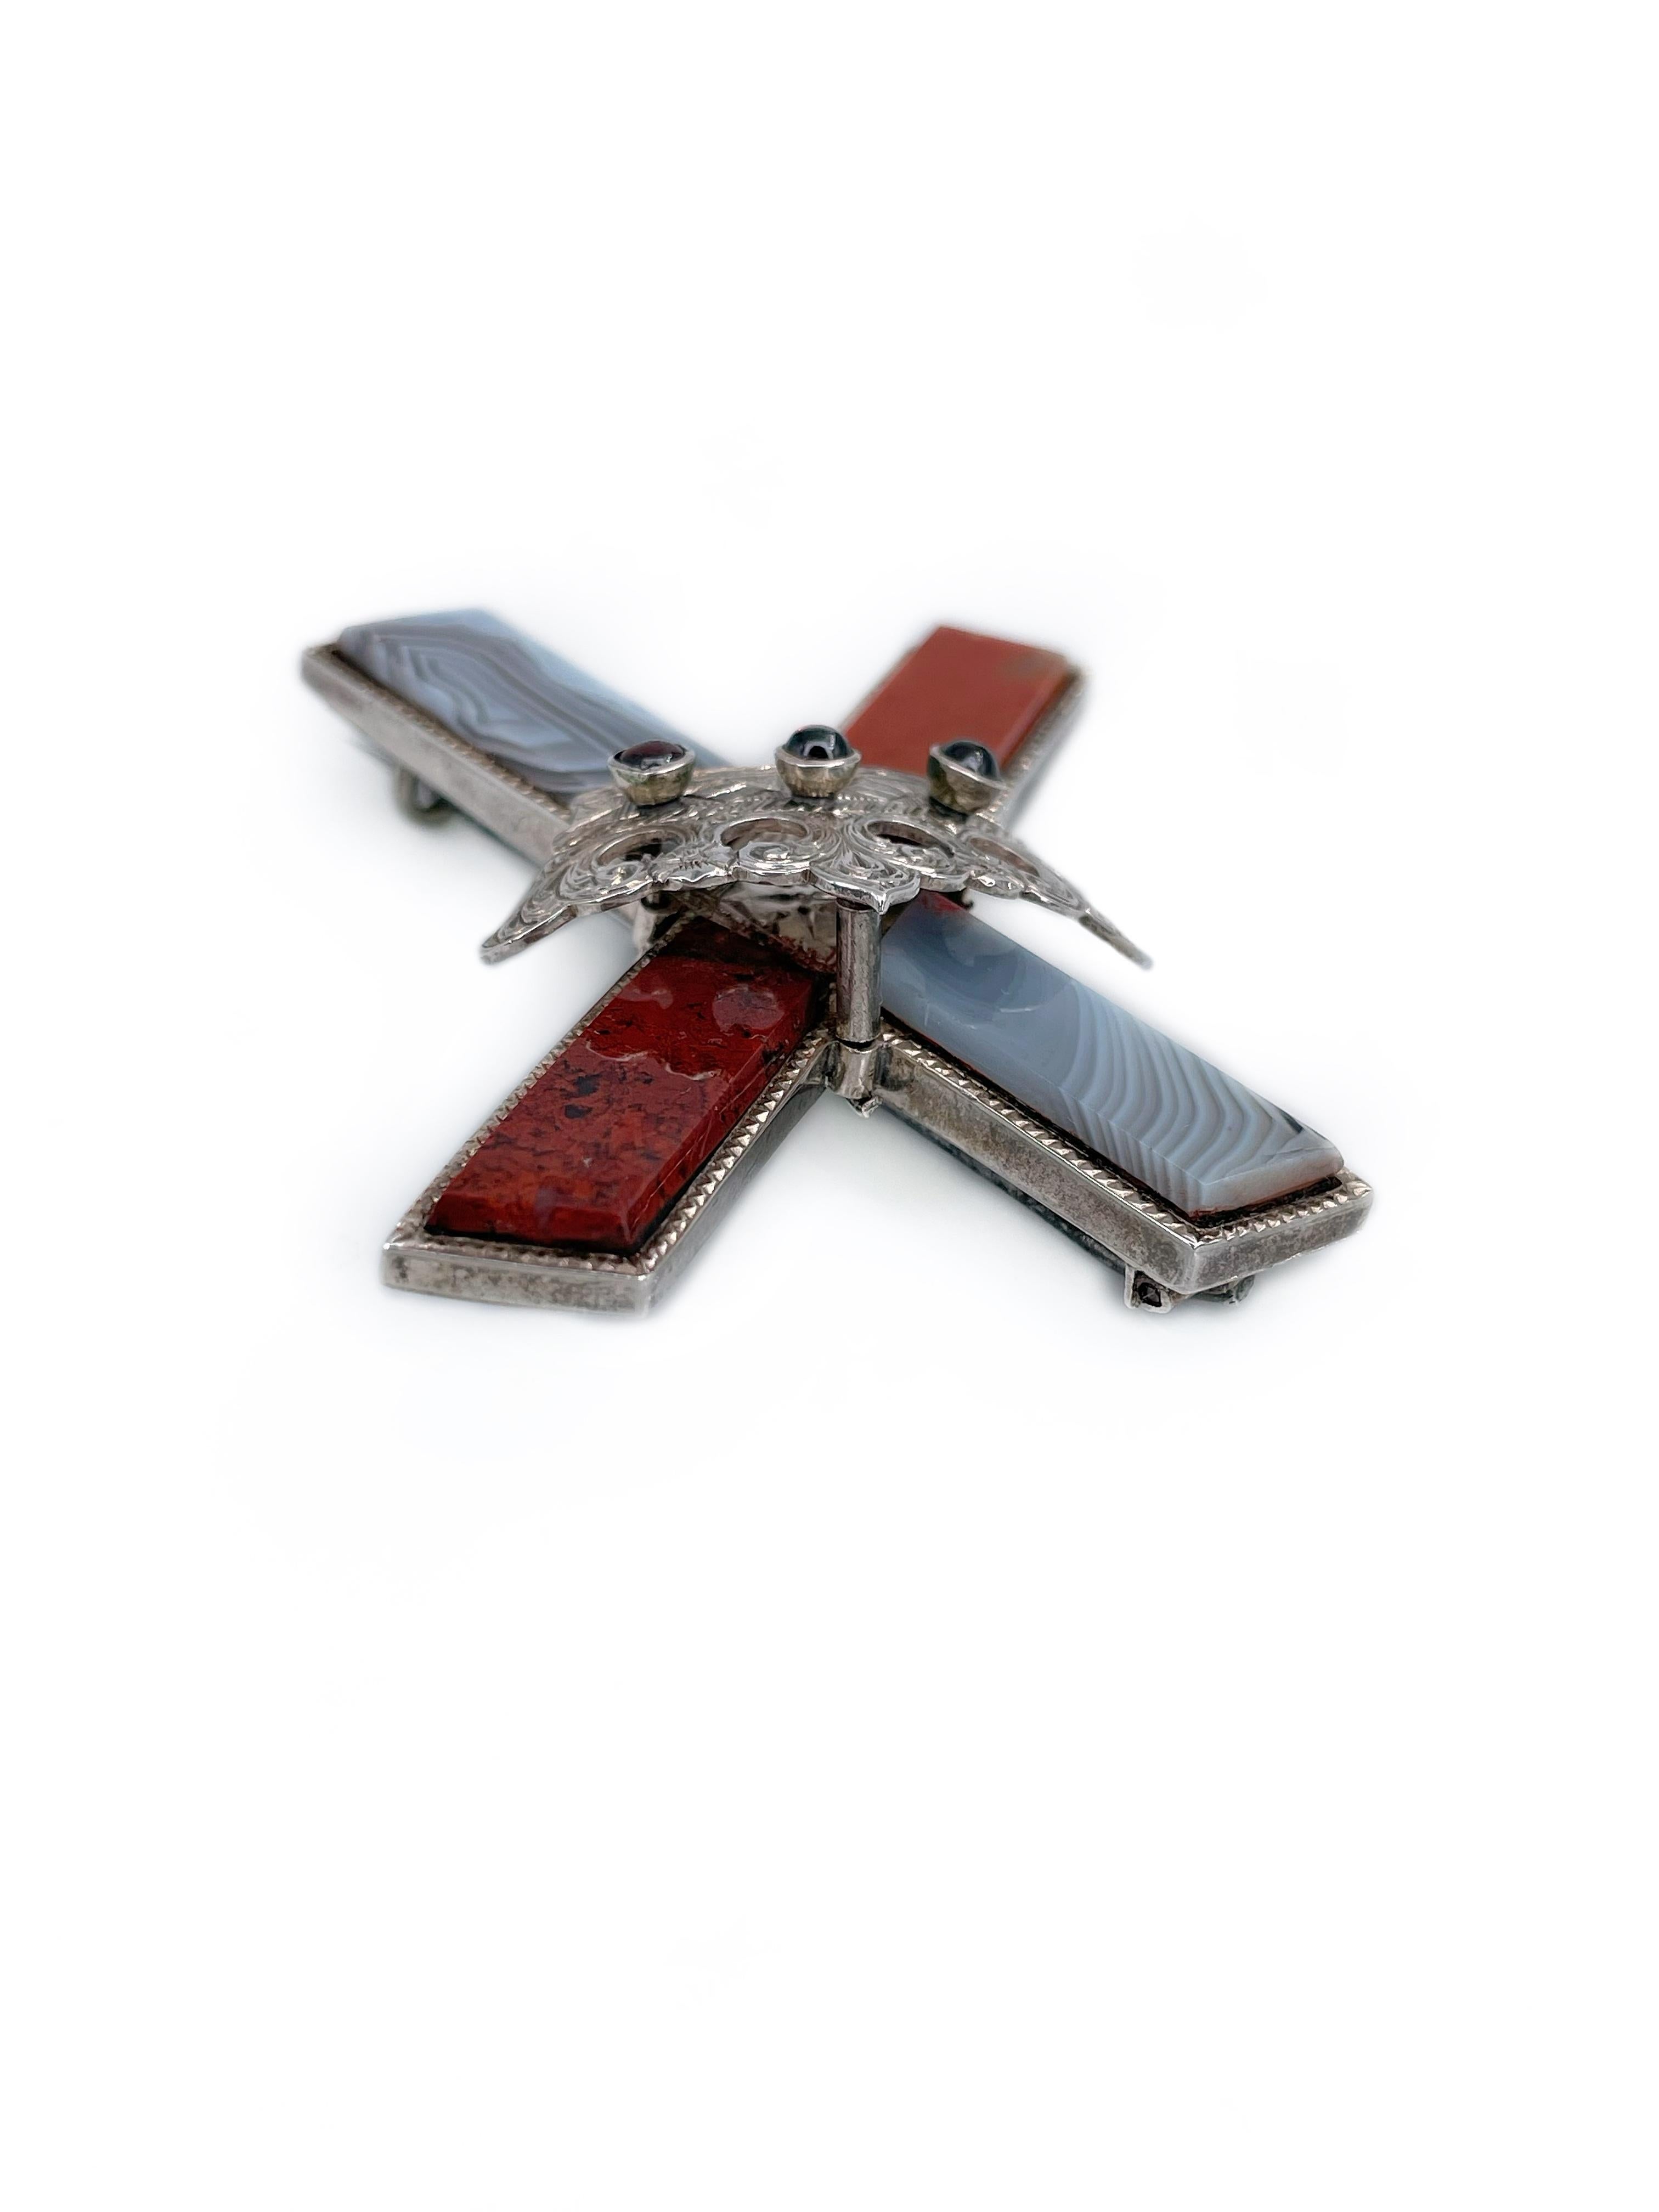 Mixed Cut Victorian Silver Scottish Agate Garnet Saltire Cross And Crown Pin Brooch